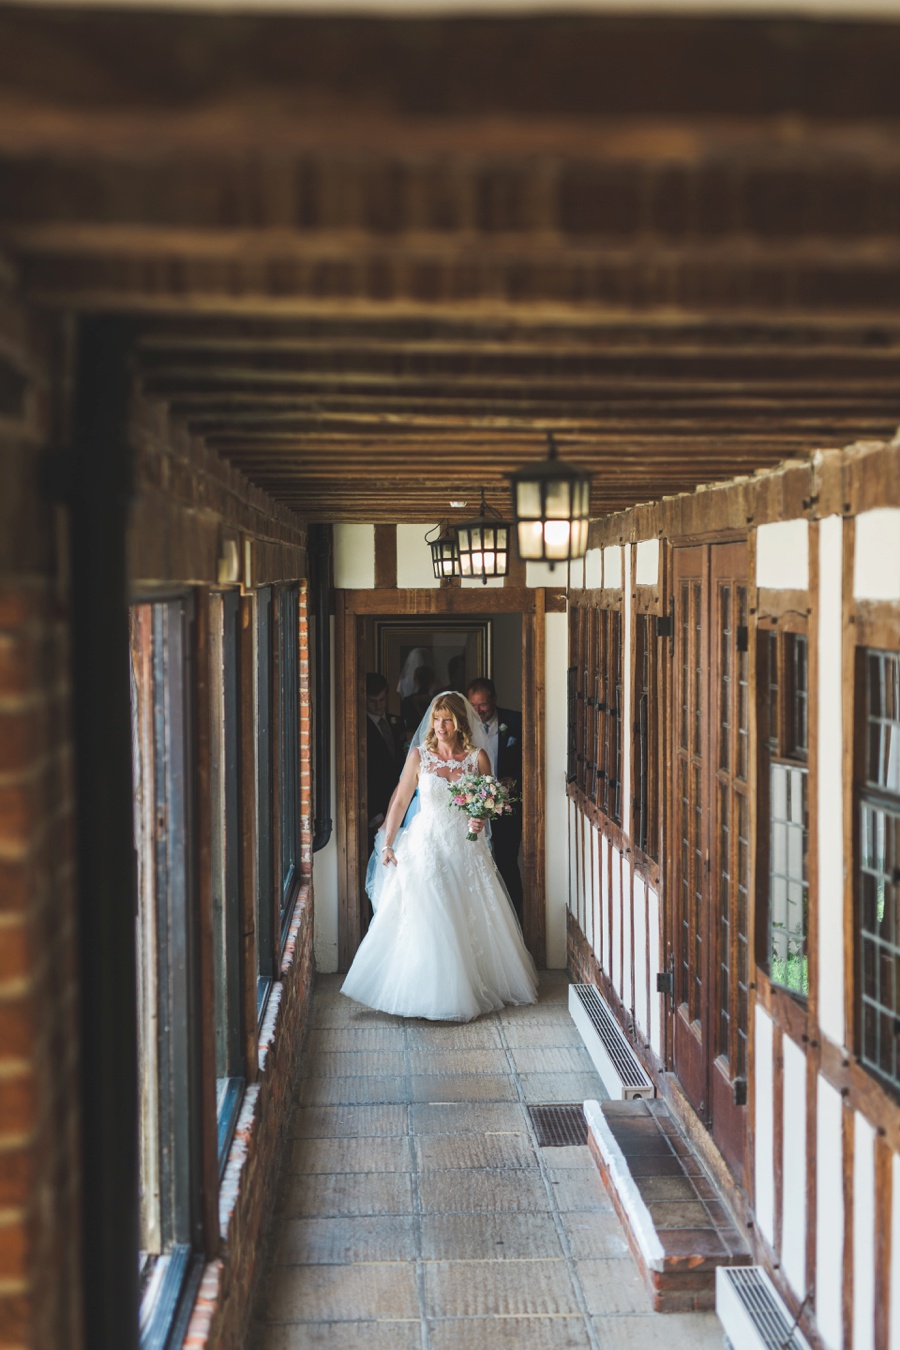 Wedding photography at the swan in Lavenham Rob & Clare Cuff